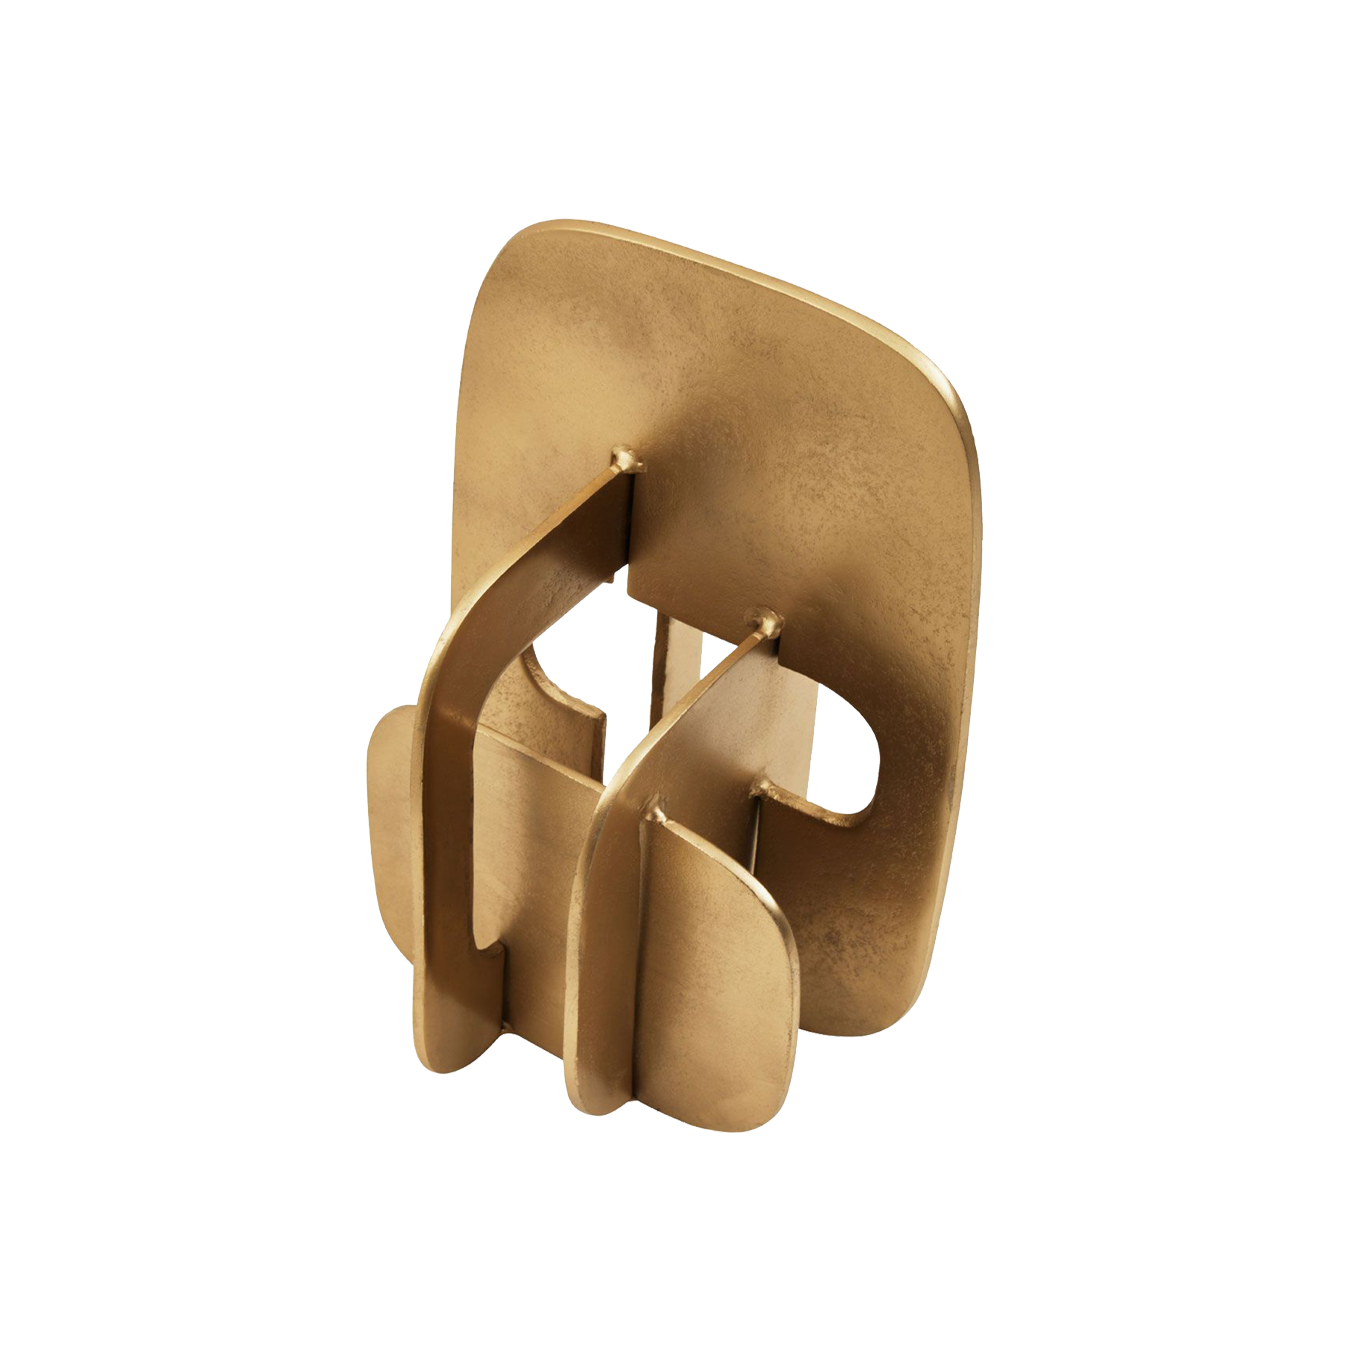 Prato Abstract Gold Sculpture